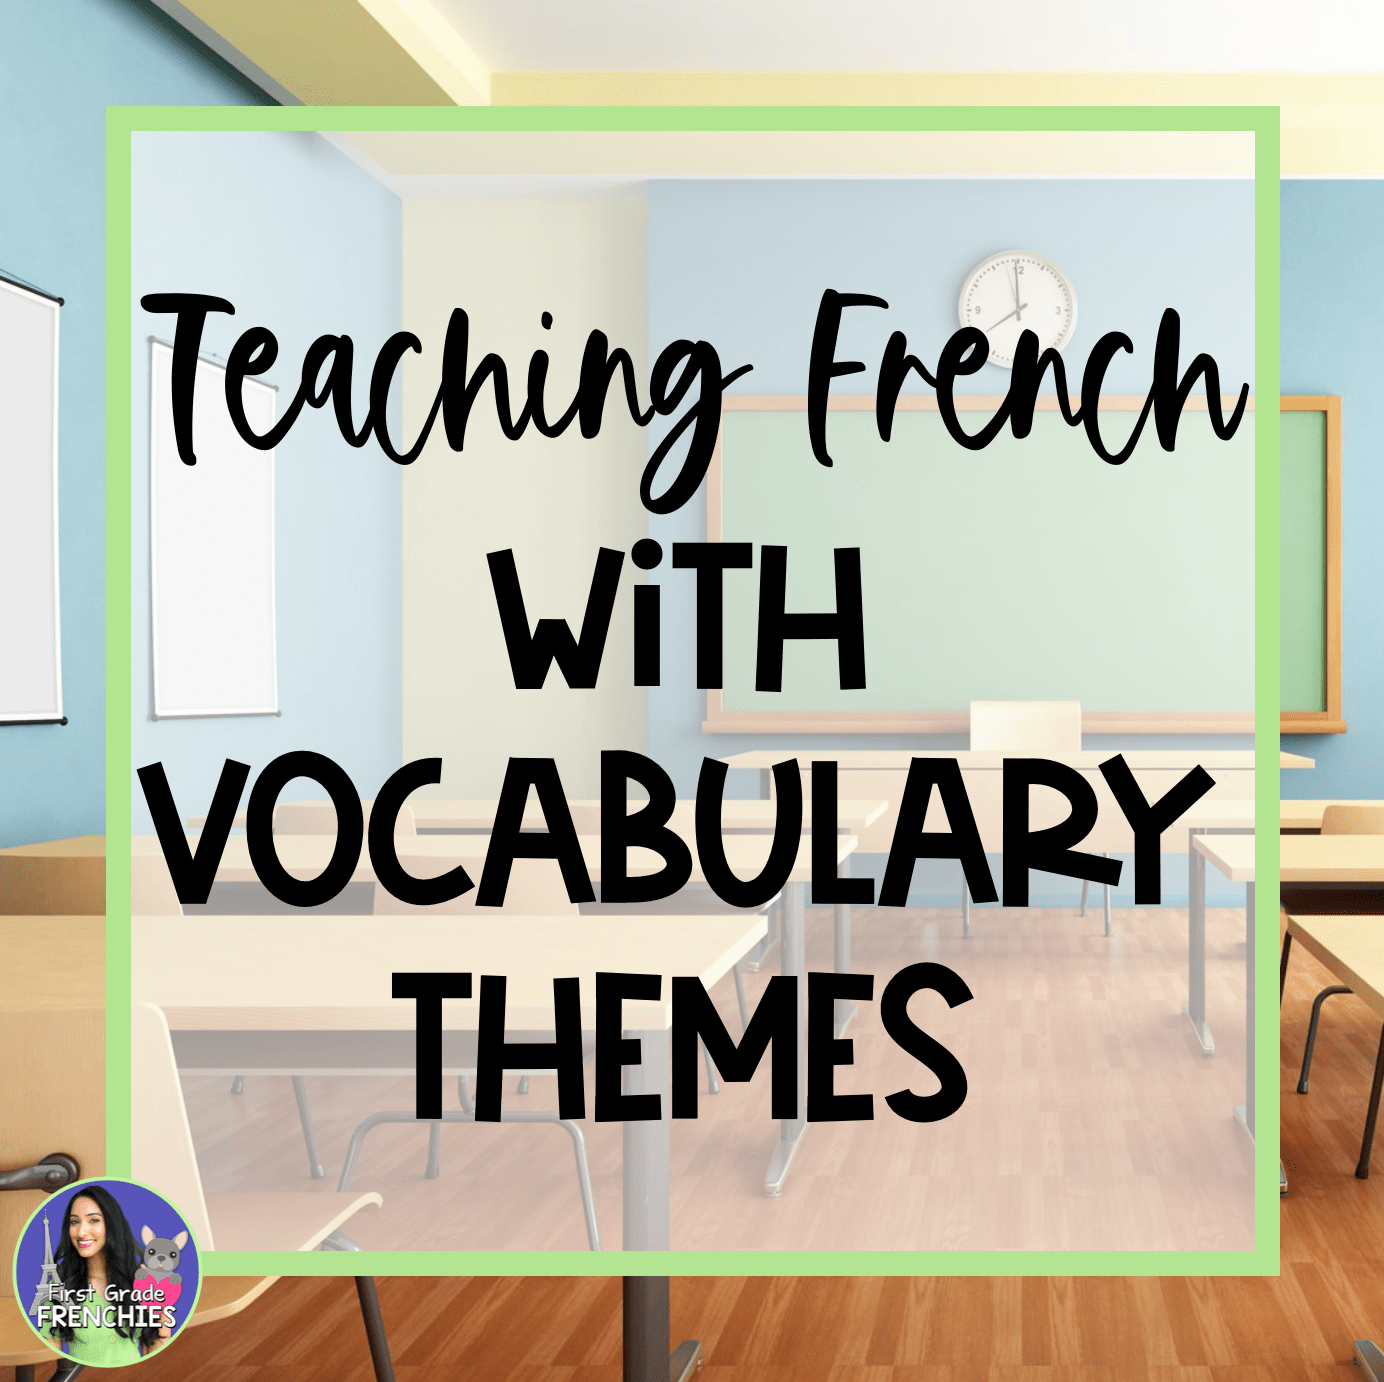 Teaching French with vocabulary themes — First Grade Frenchies